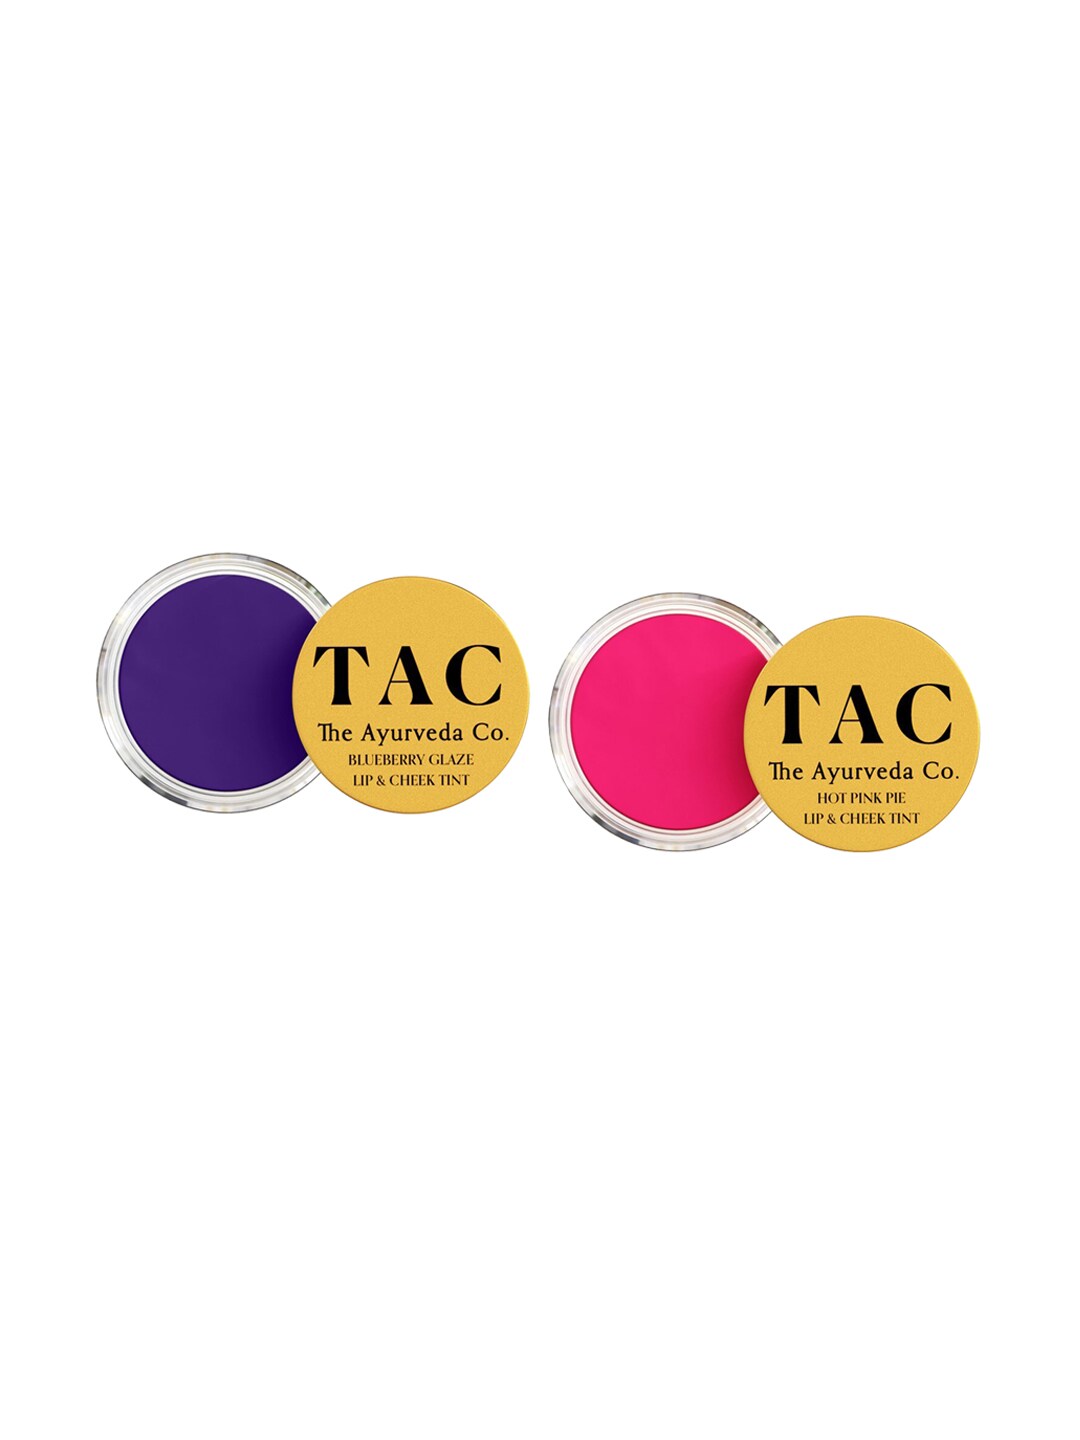 TAC - The Ayurveda Co. Set of 2 Lip & Cheek Tints - Blueberry Glaze & Hot Pink Pie Price in India